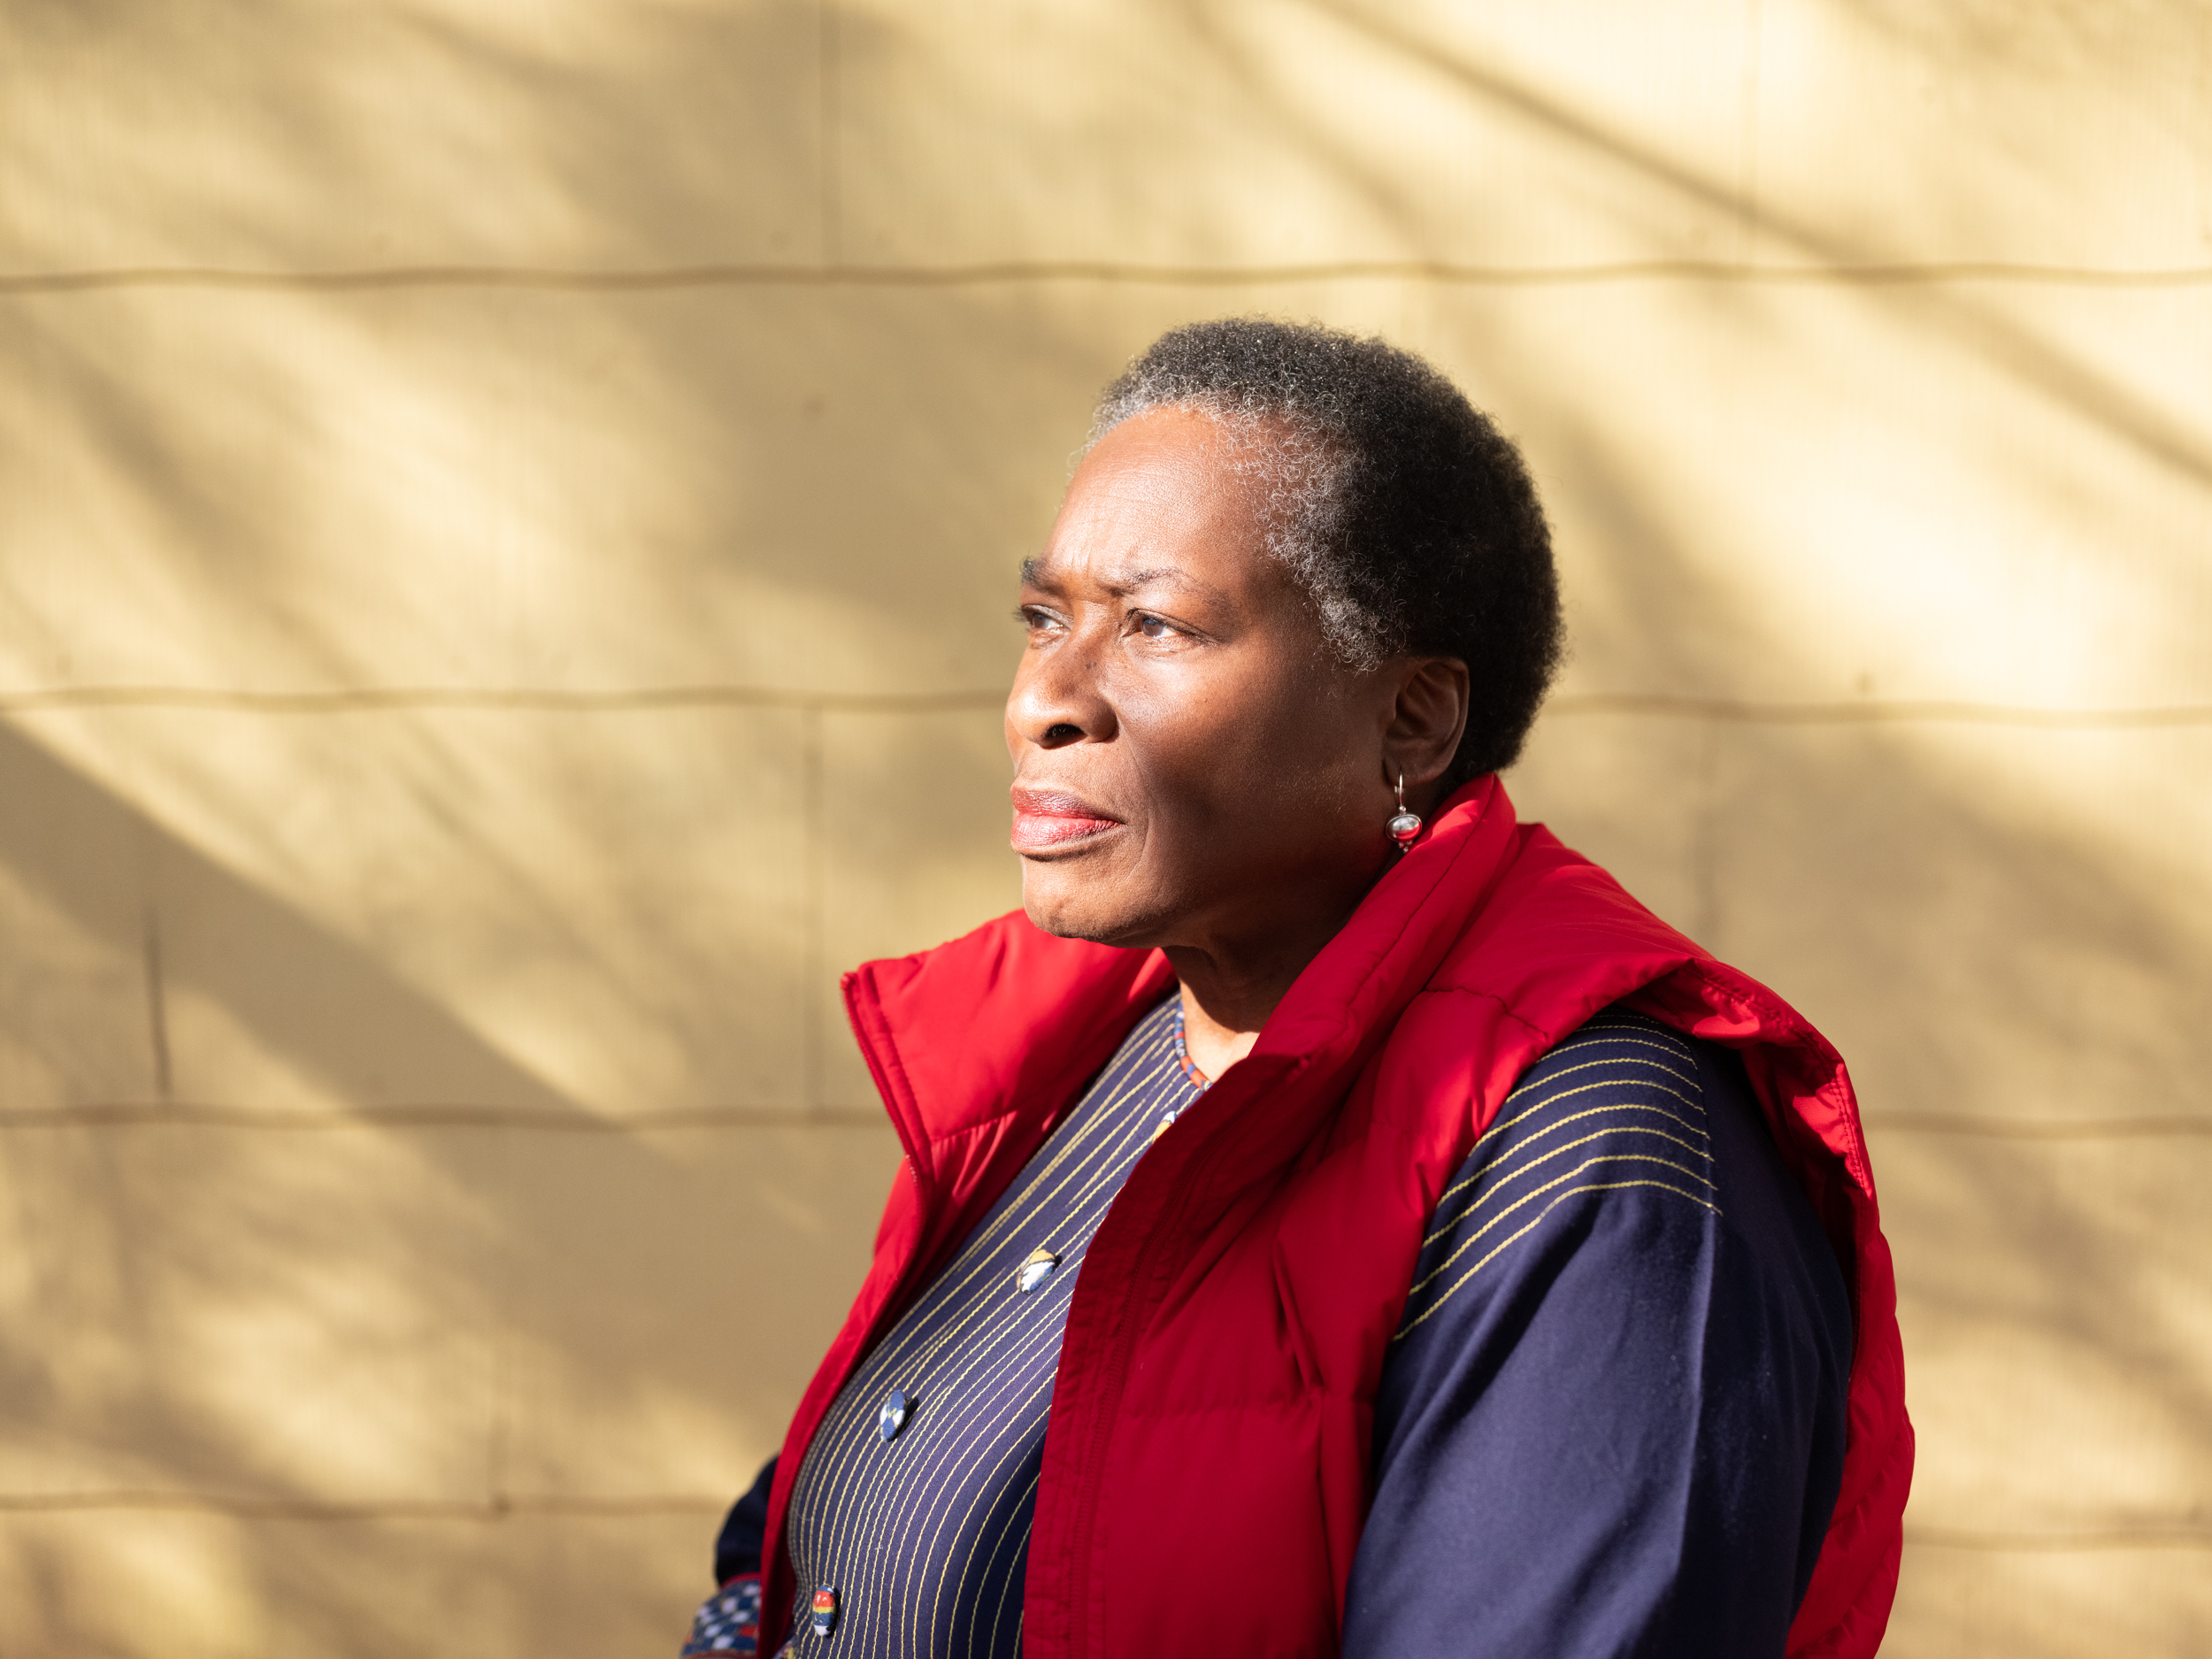 Lois is a Black woman with short, greying hair. She's standing outside in dappled sunlight, looking to the left, against a backdrop of a yellow home or other building. She's looking into the distance with a pensive expression.